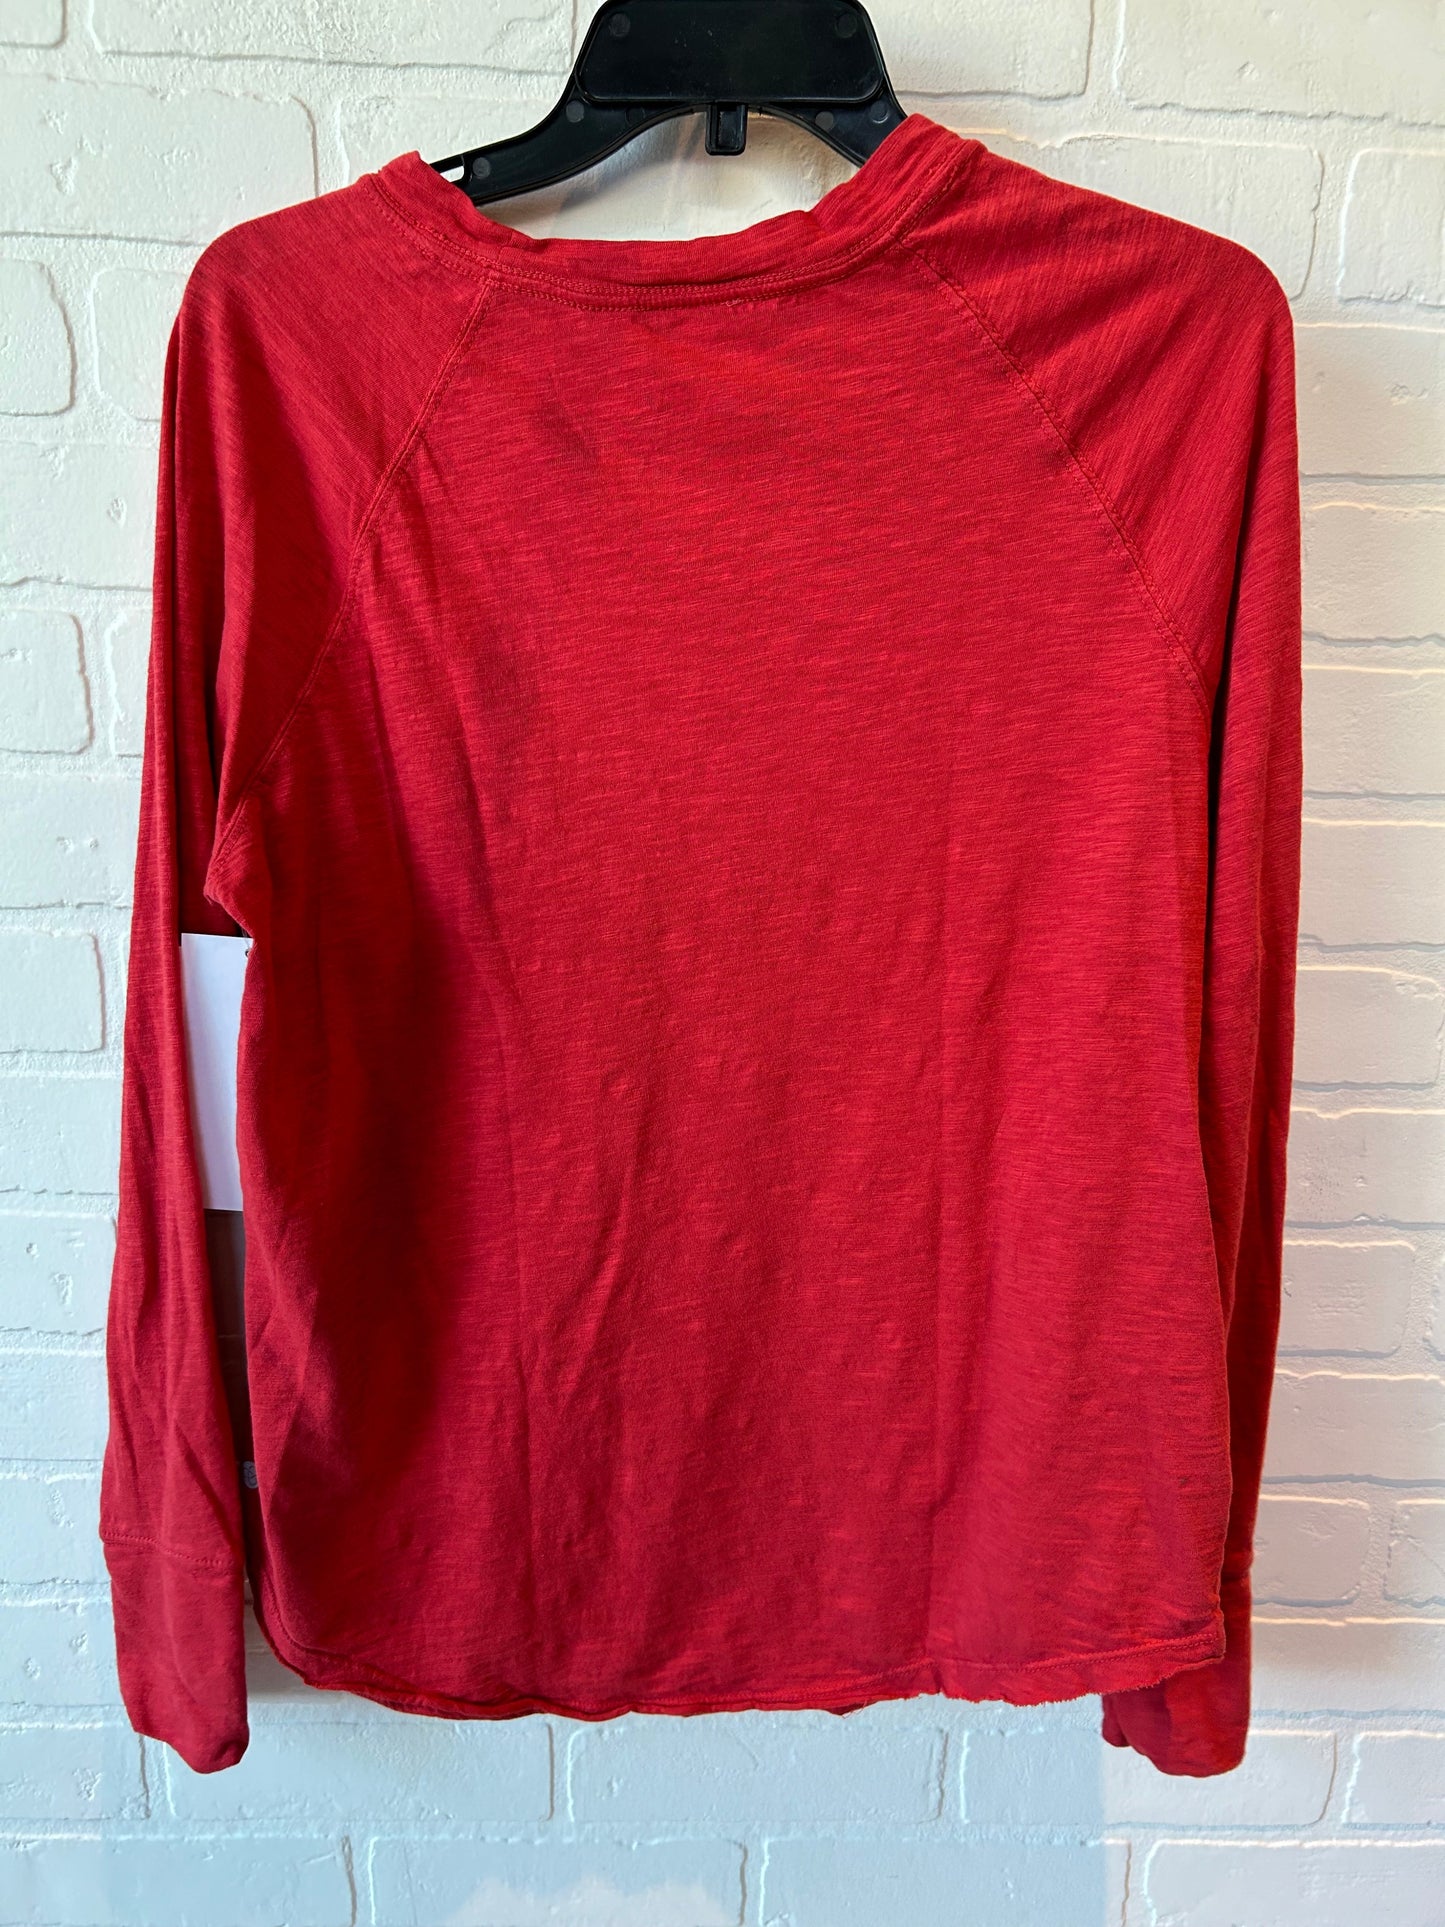 Red Athletic Top Long Sleeve Crewneck Zella, Size S